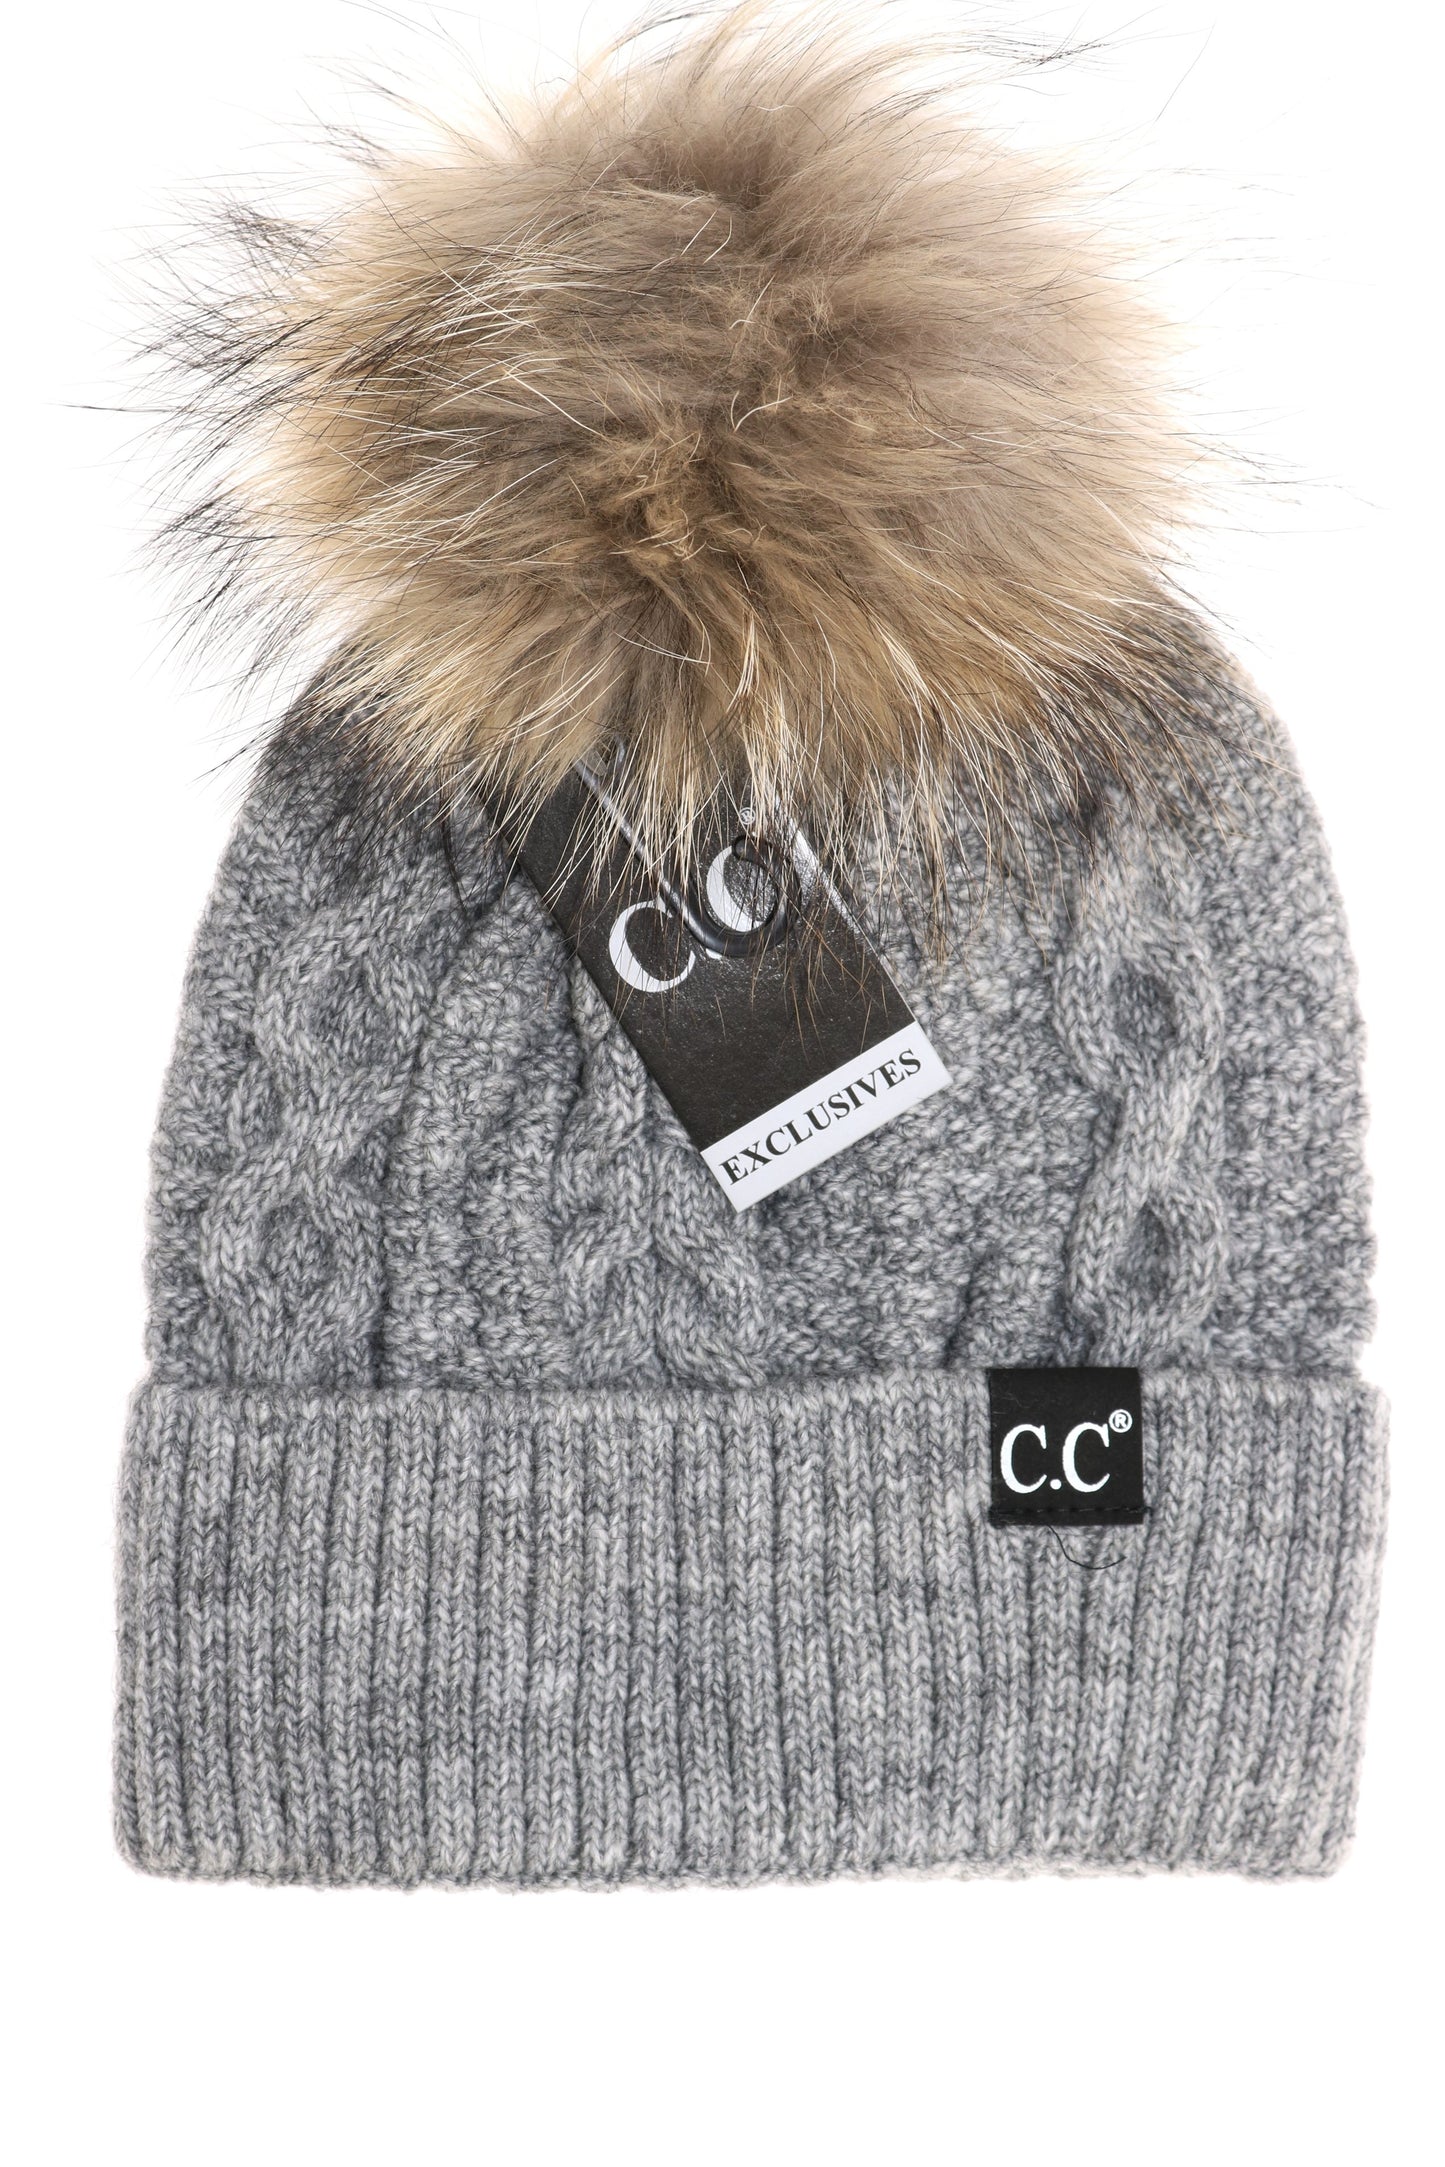 C.C Exclusive-Black Label Special Edition Ribbed Cuff Fur Pom Beanie- MULTIPLE COLORS